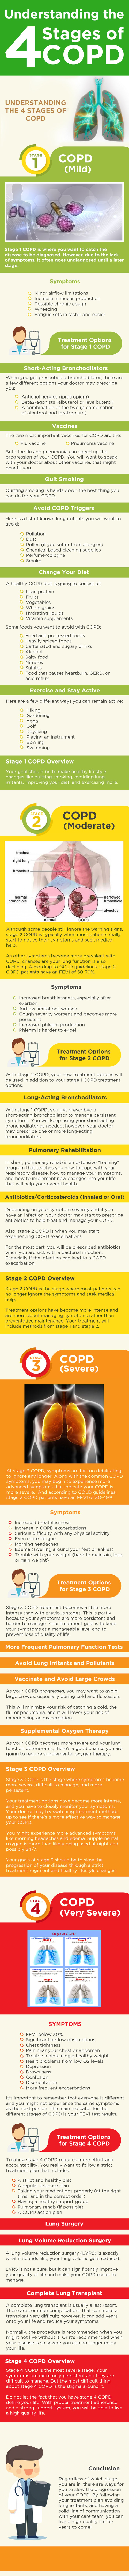 Understanding the 4 Stages of COPD-Finallll